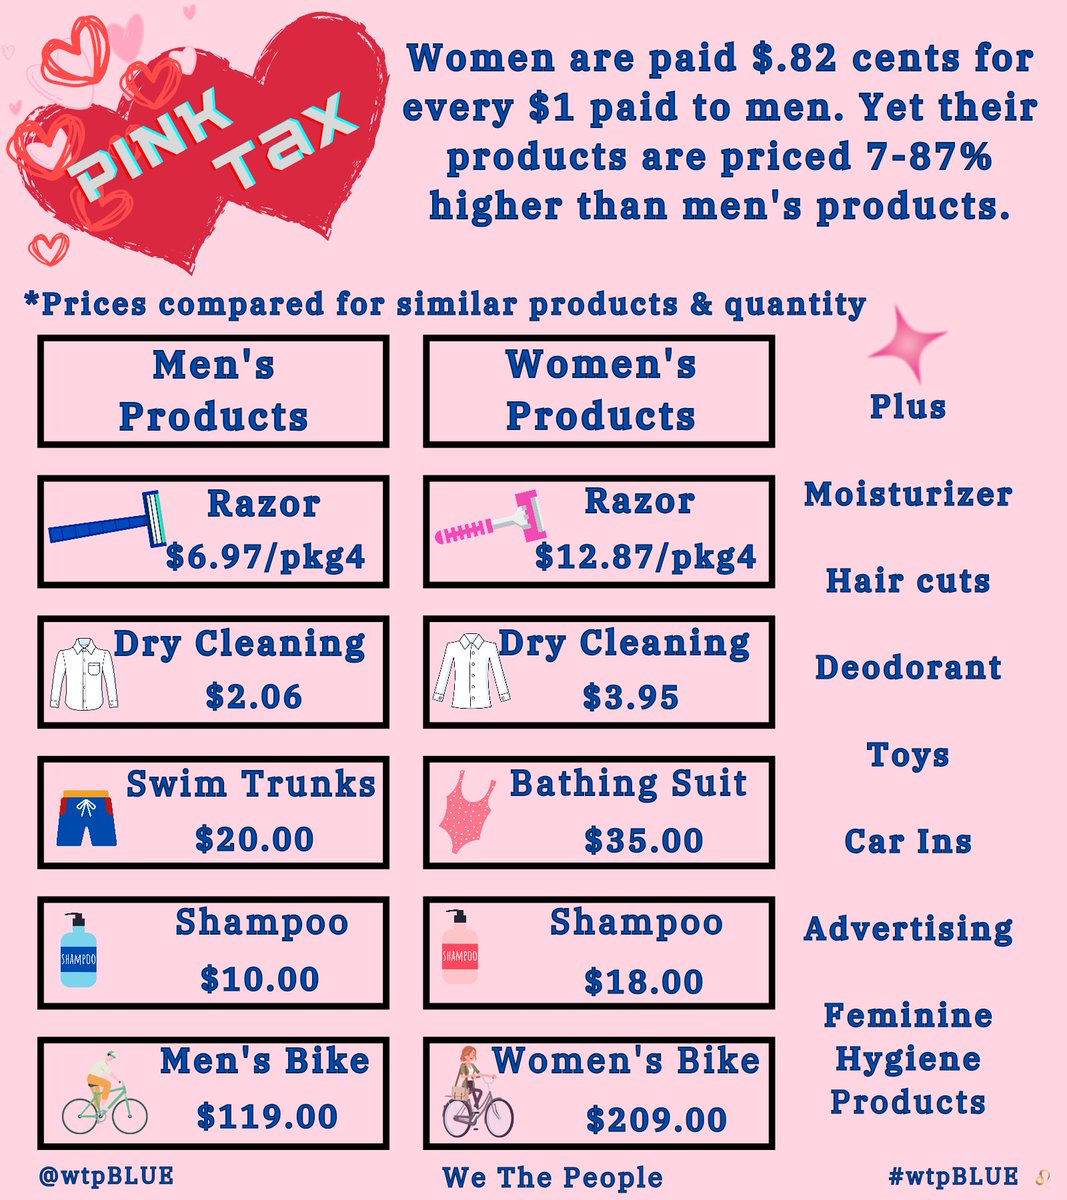 @BadrobotLinda @SenBobCasey These are examples of the Pink Tax. Vote for Bob Casey